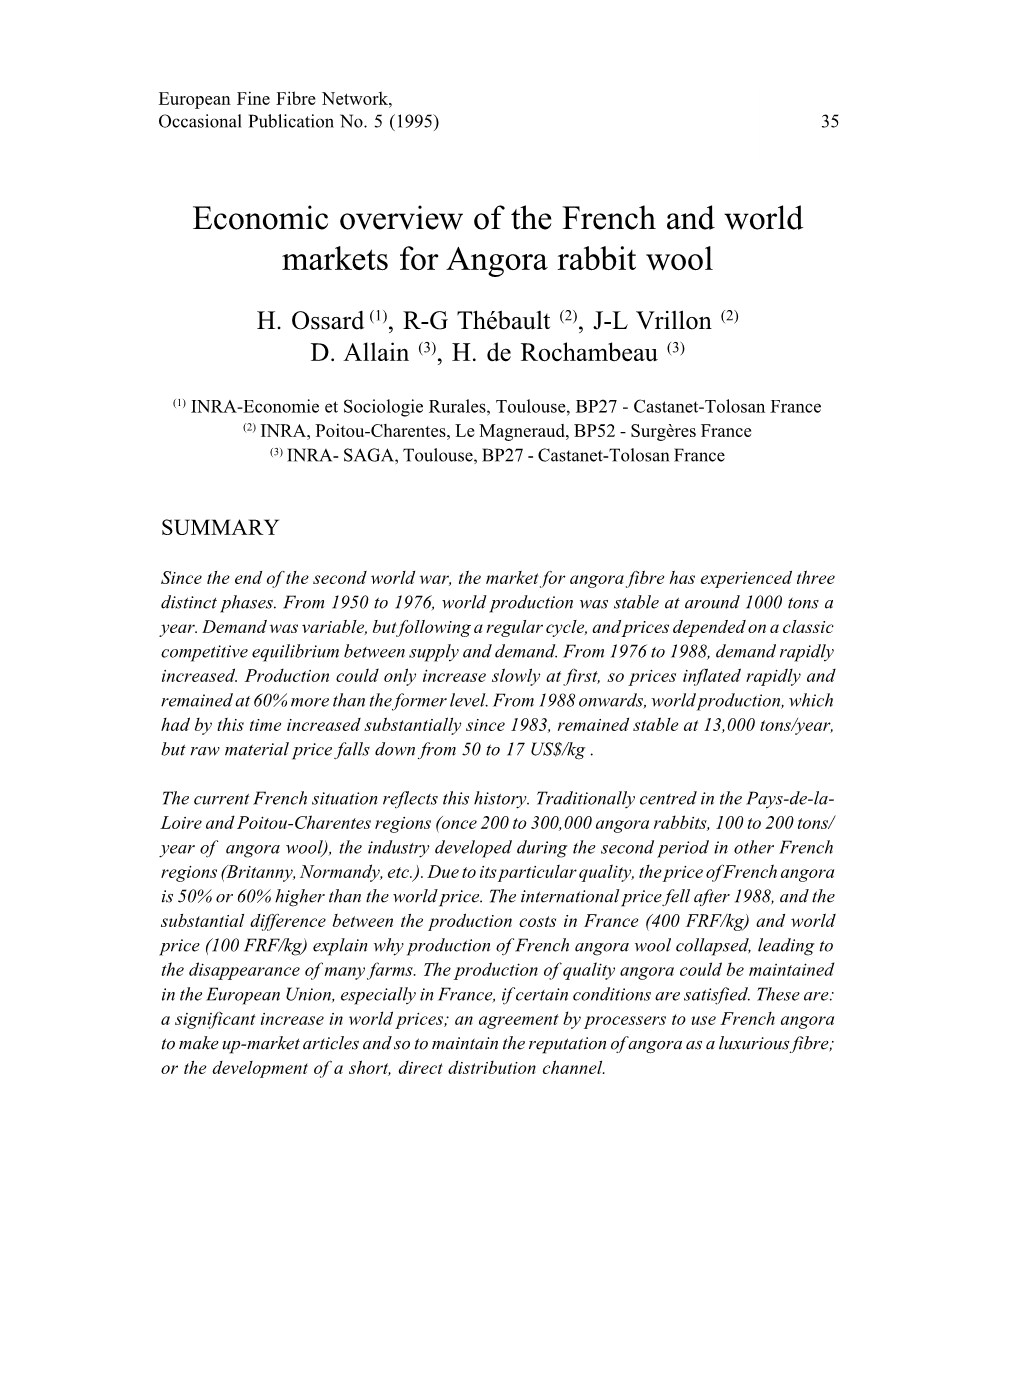 Economic Overview of the French and World Markets for Angora Rabbit Wool